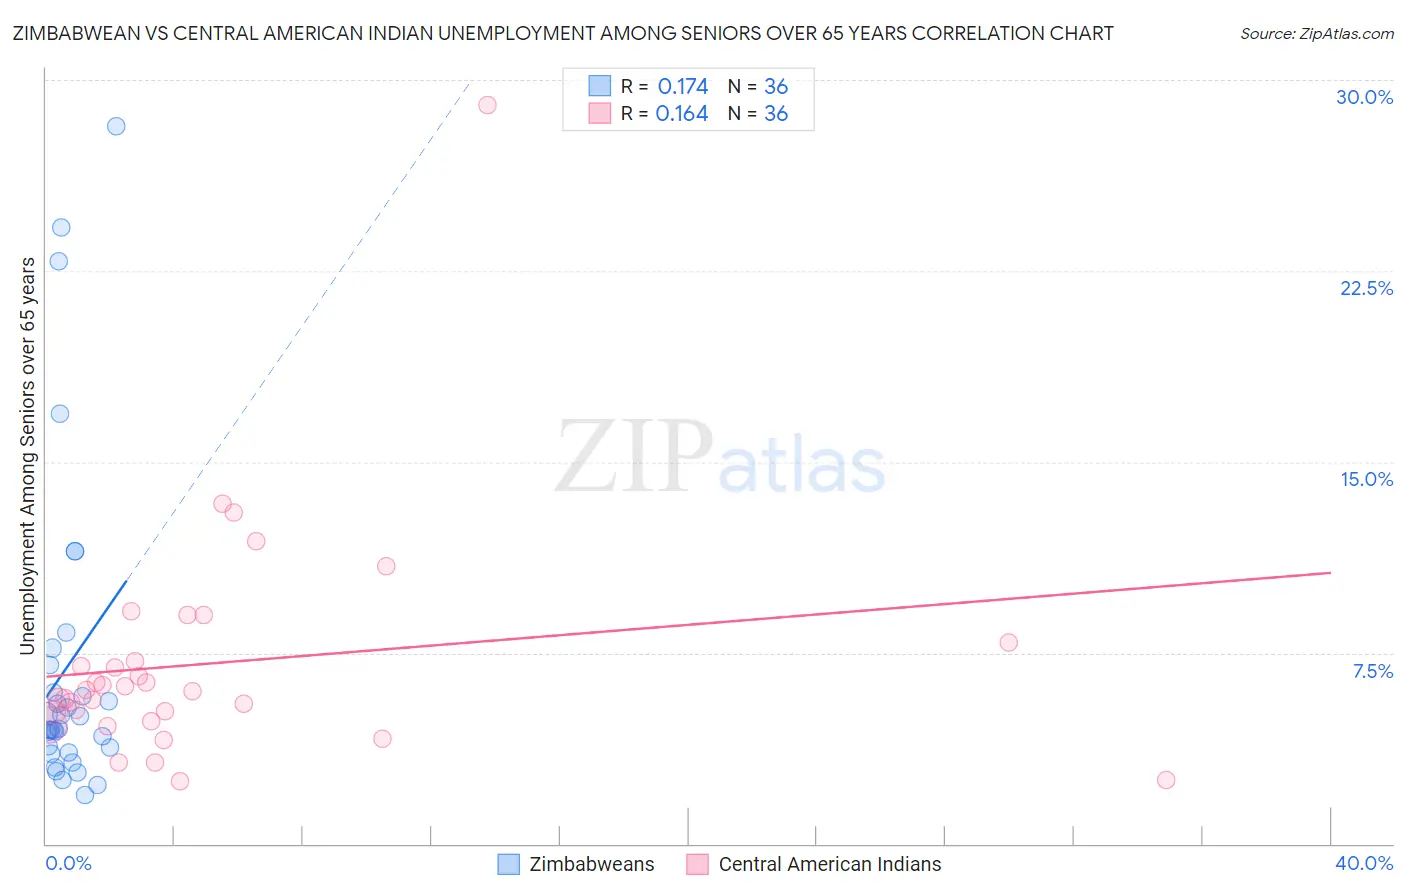 Zimbabwean vs Central American Indian Unemployment Among Seniors over 65 years